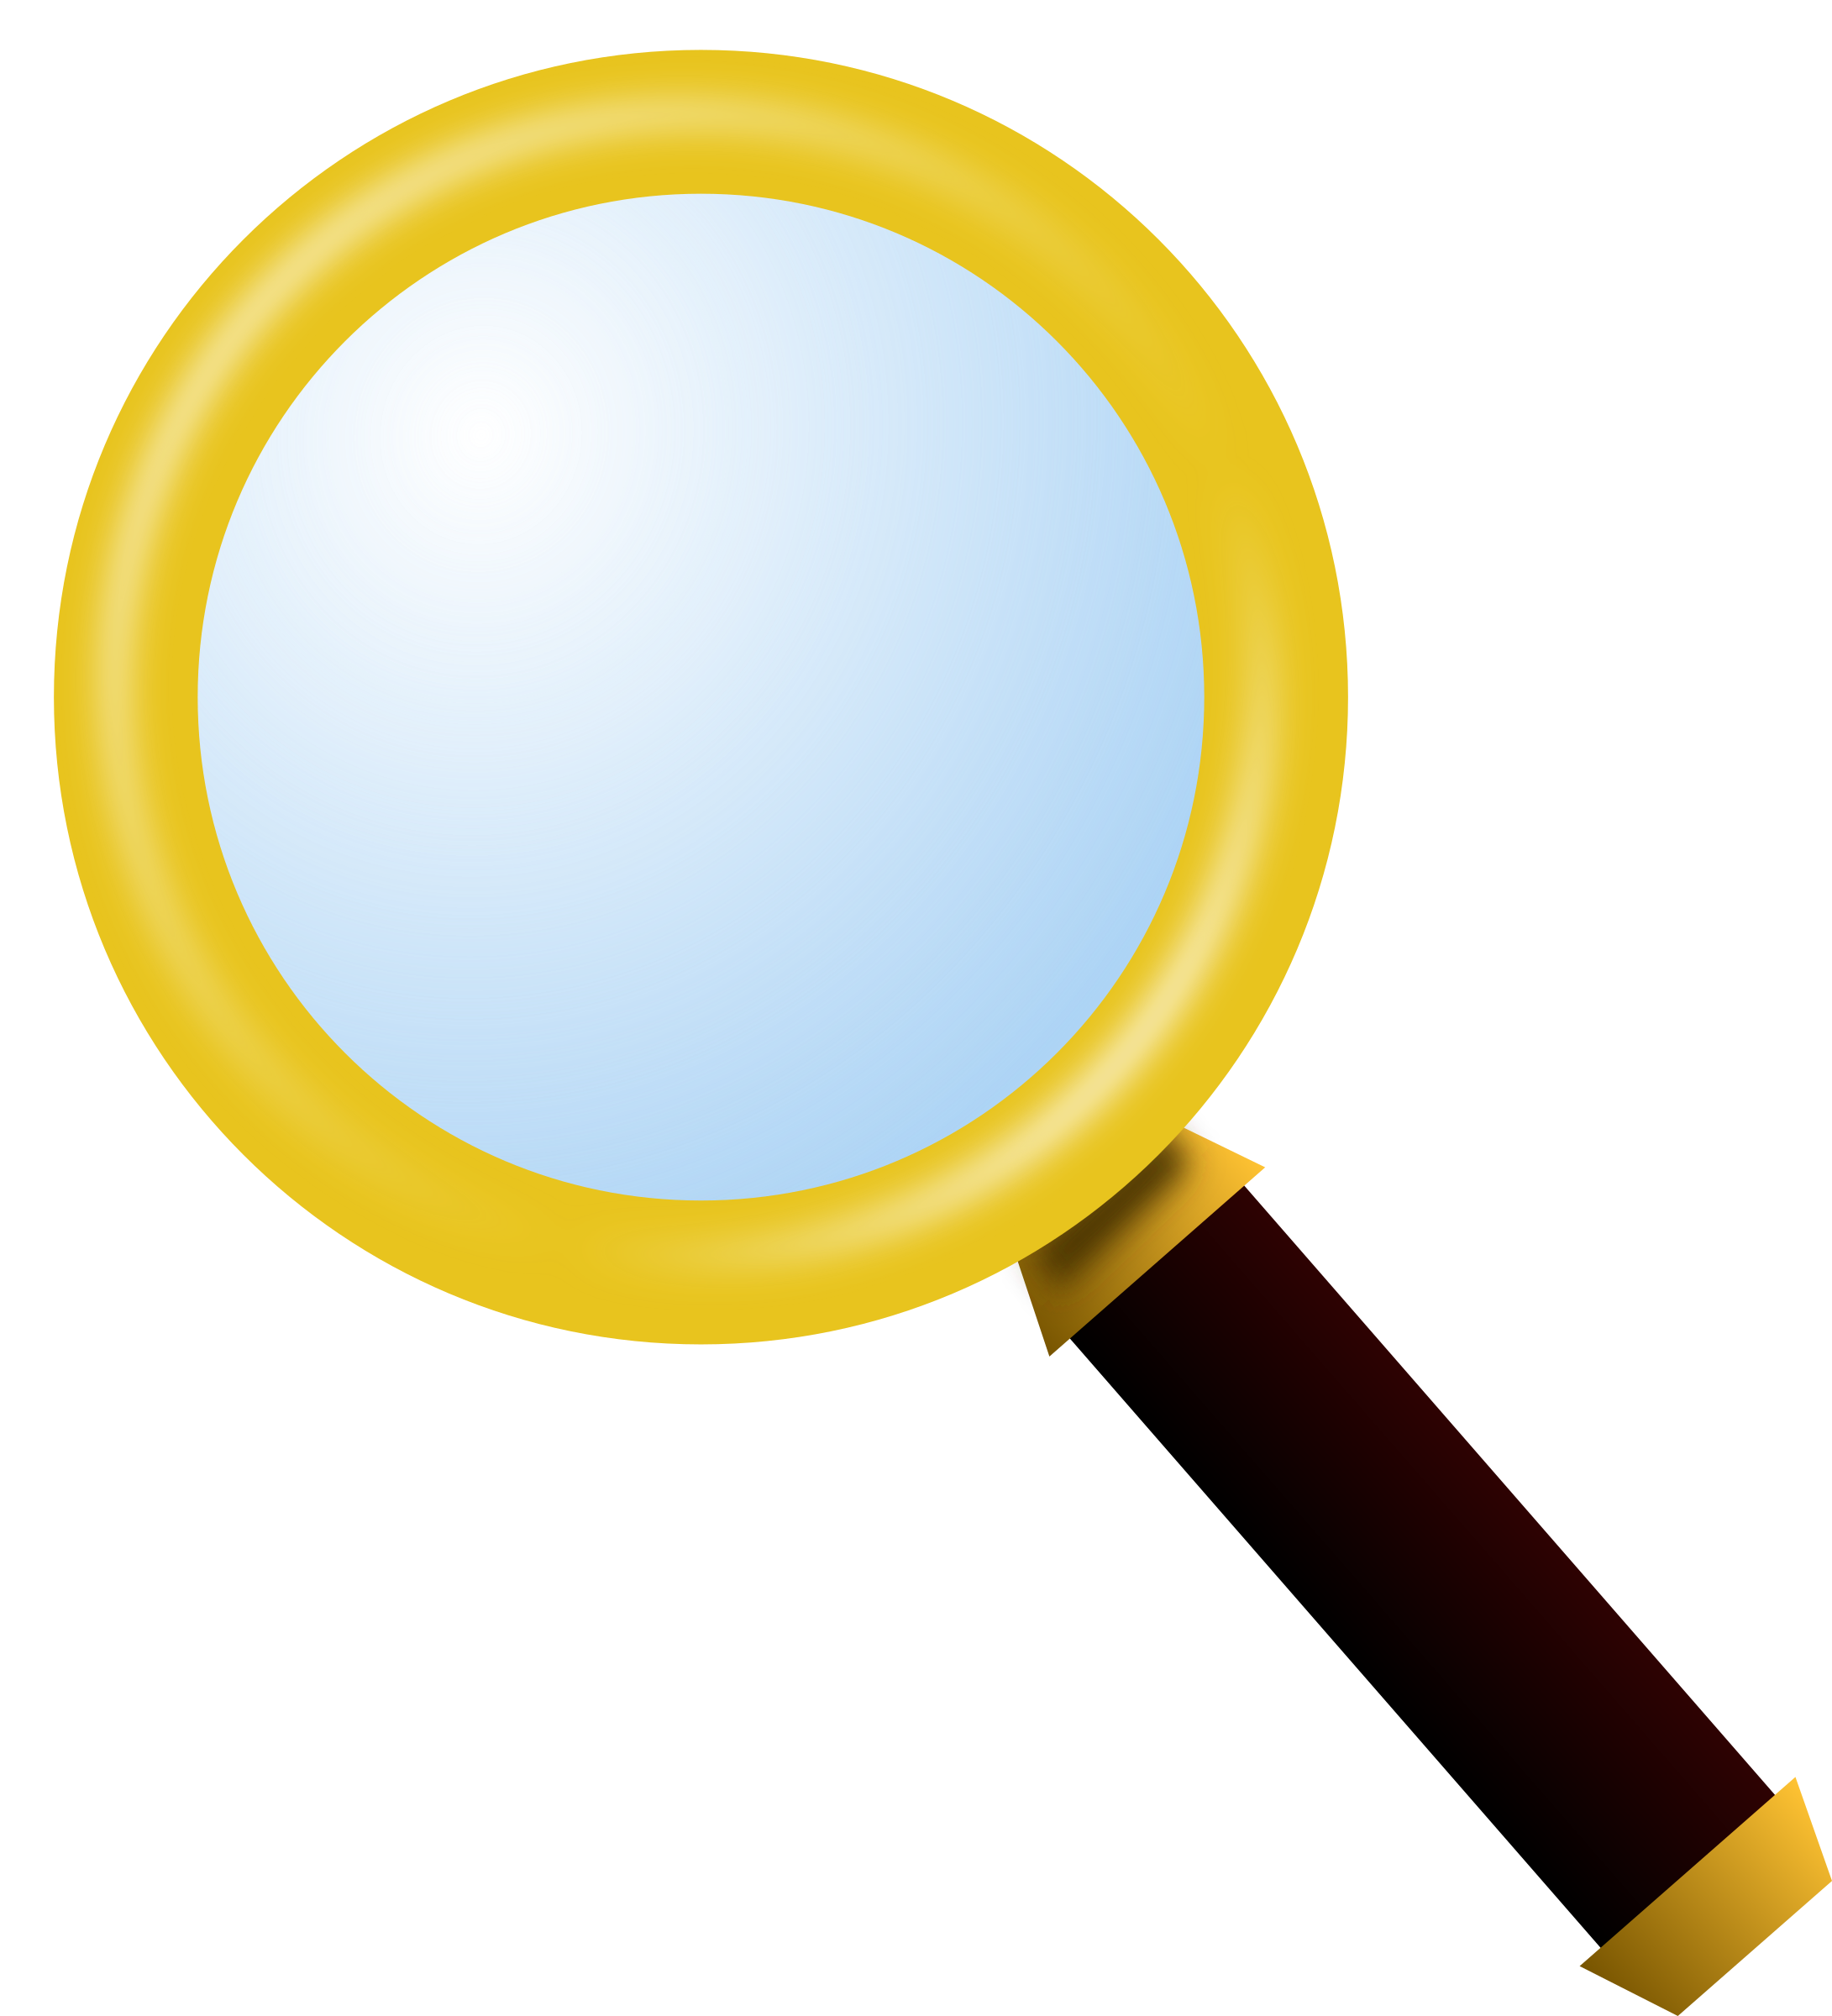 Magnifying glass magnify glass clip art at vector clip art 2 ...